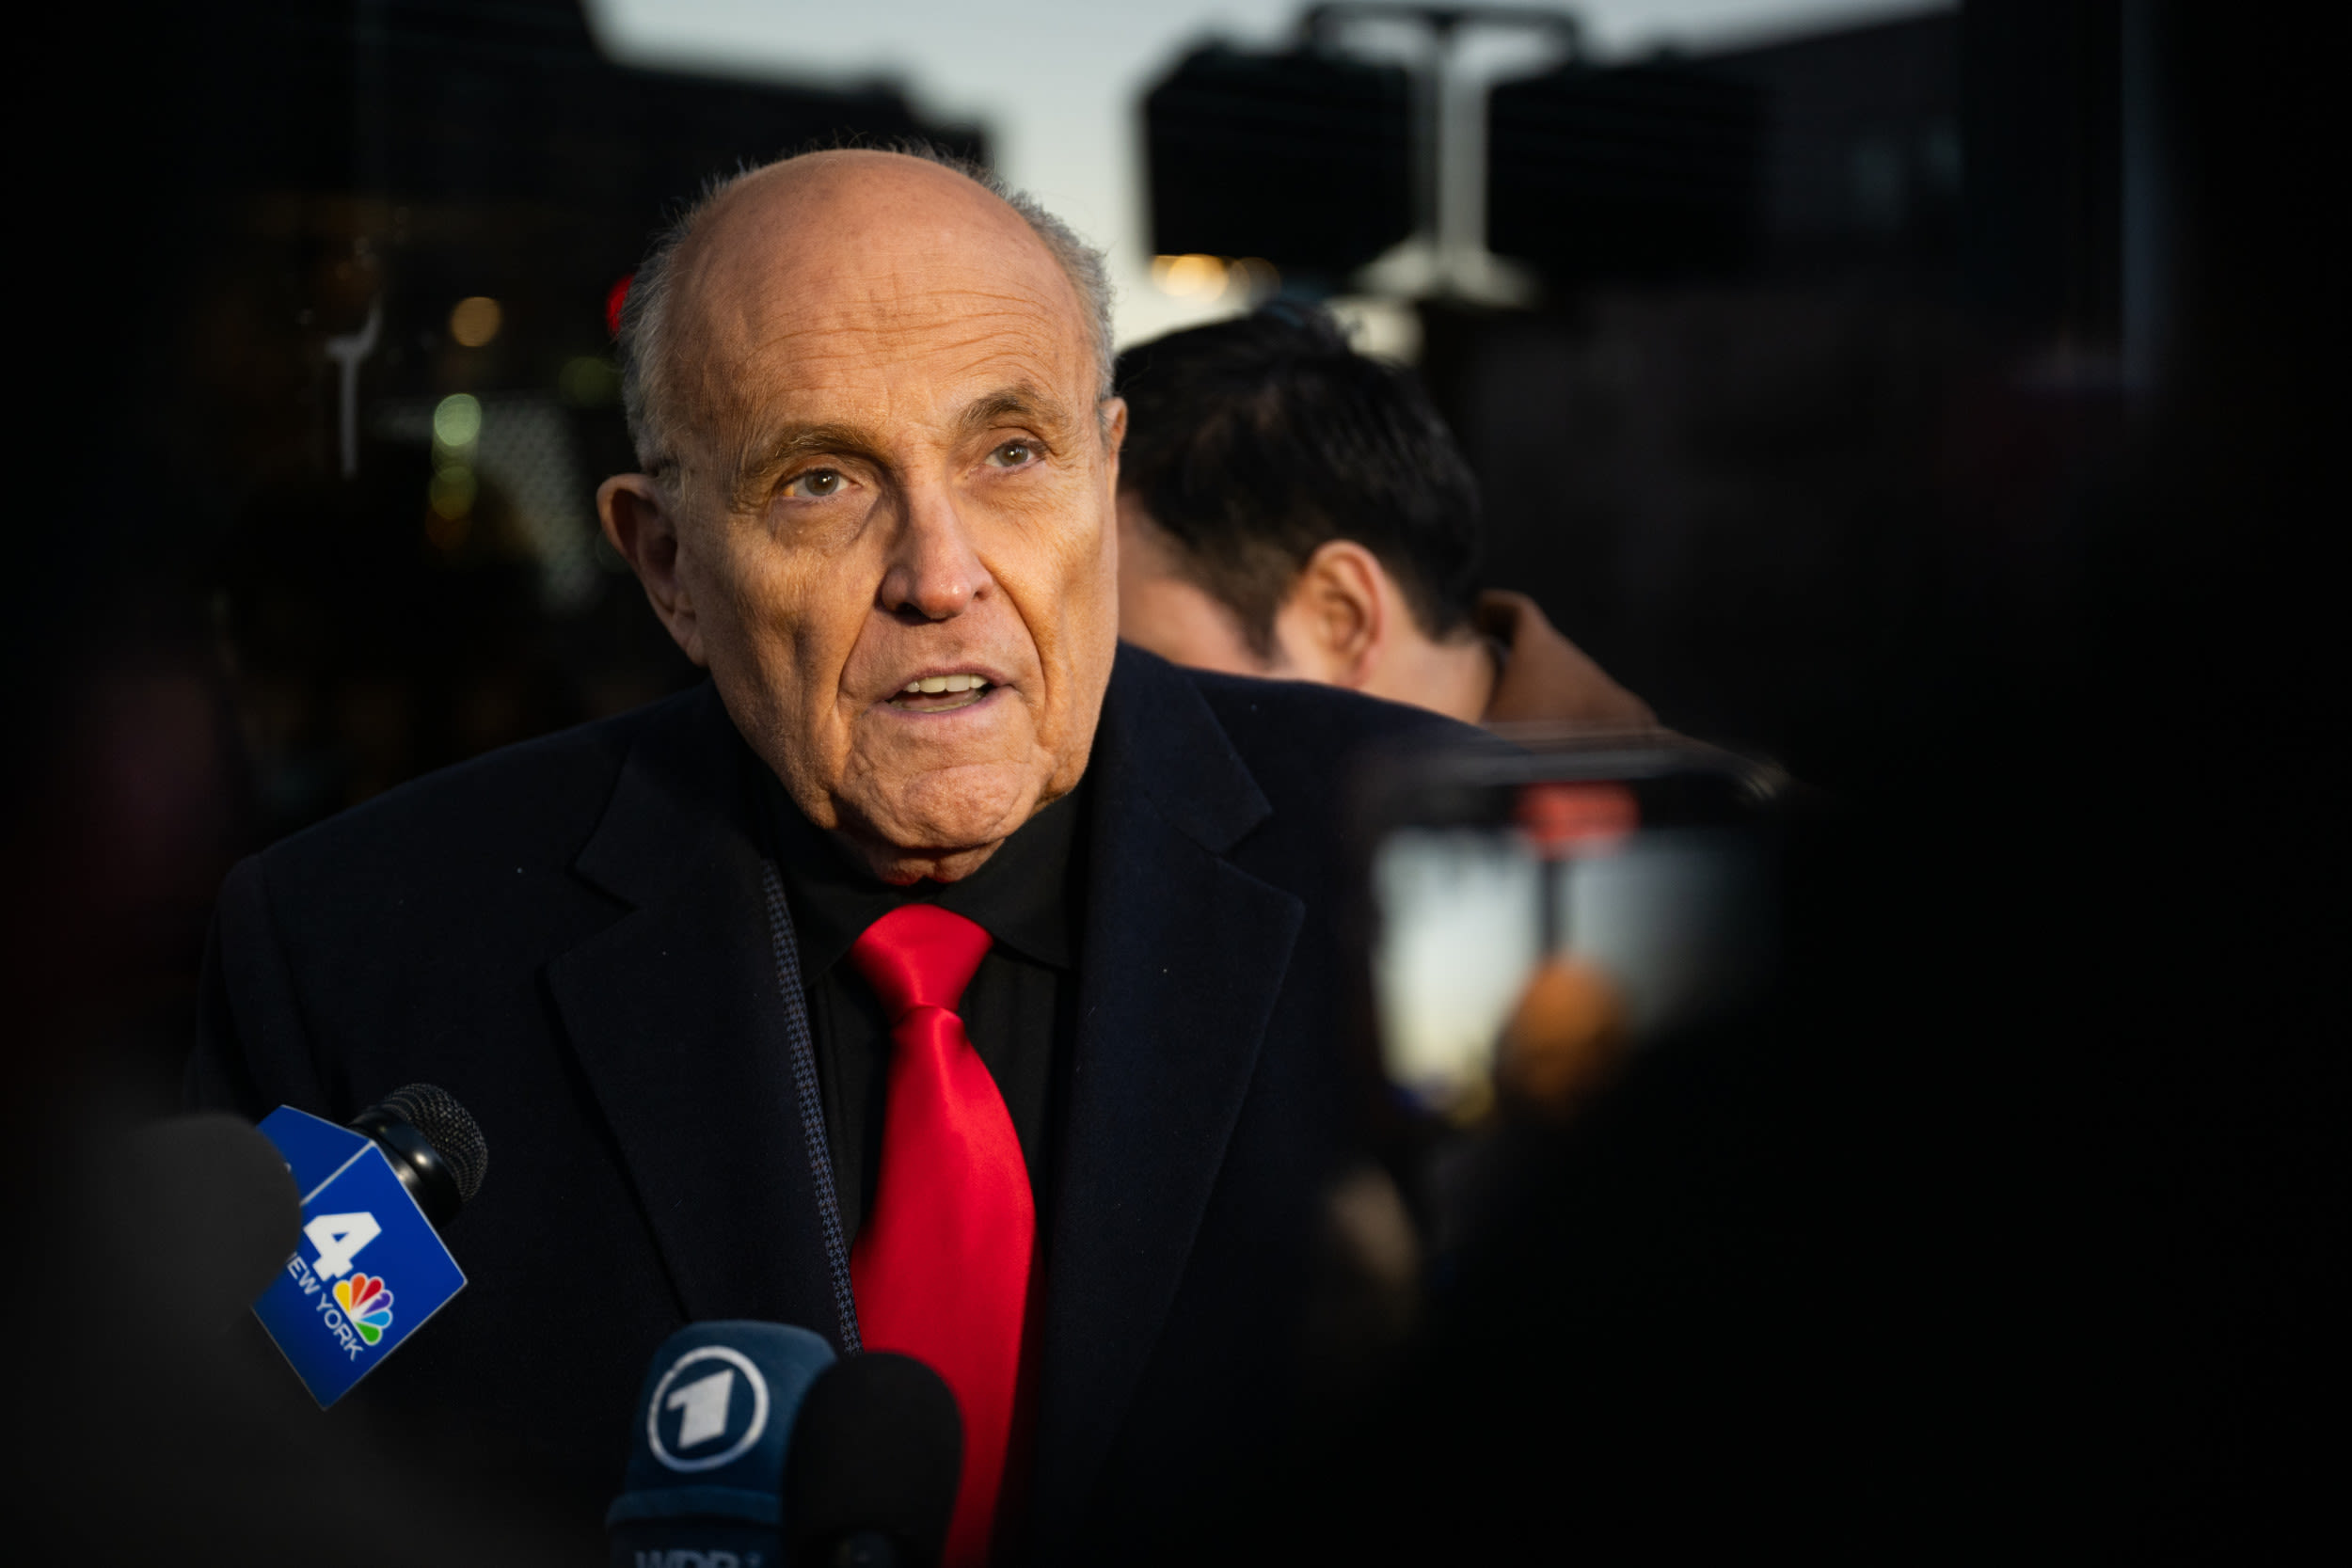 Rudy Giuliani strikes bankruptcy deal with cash, luxury apartment